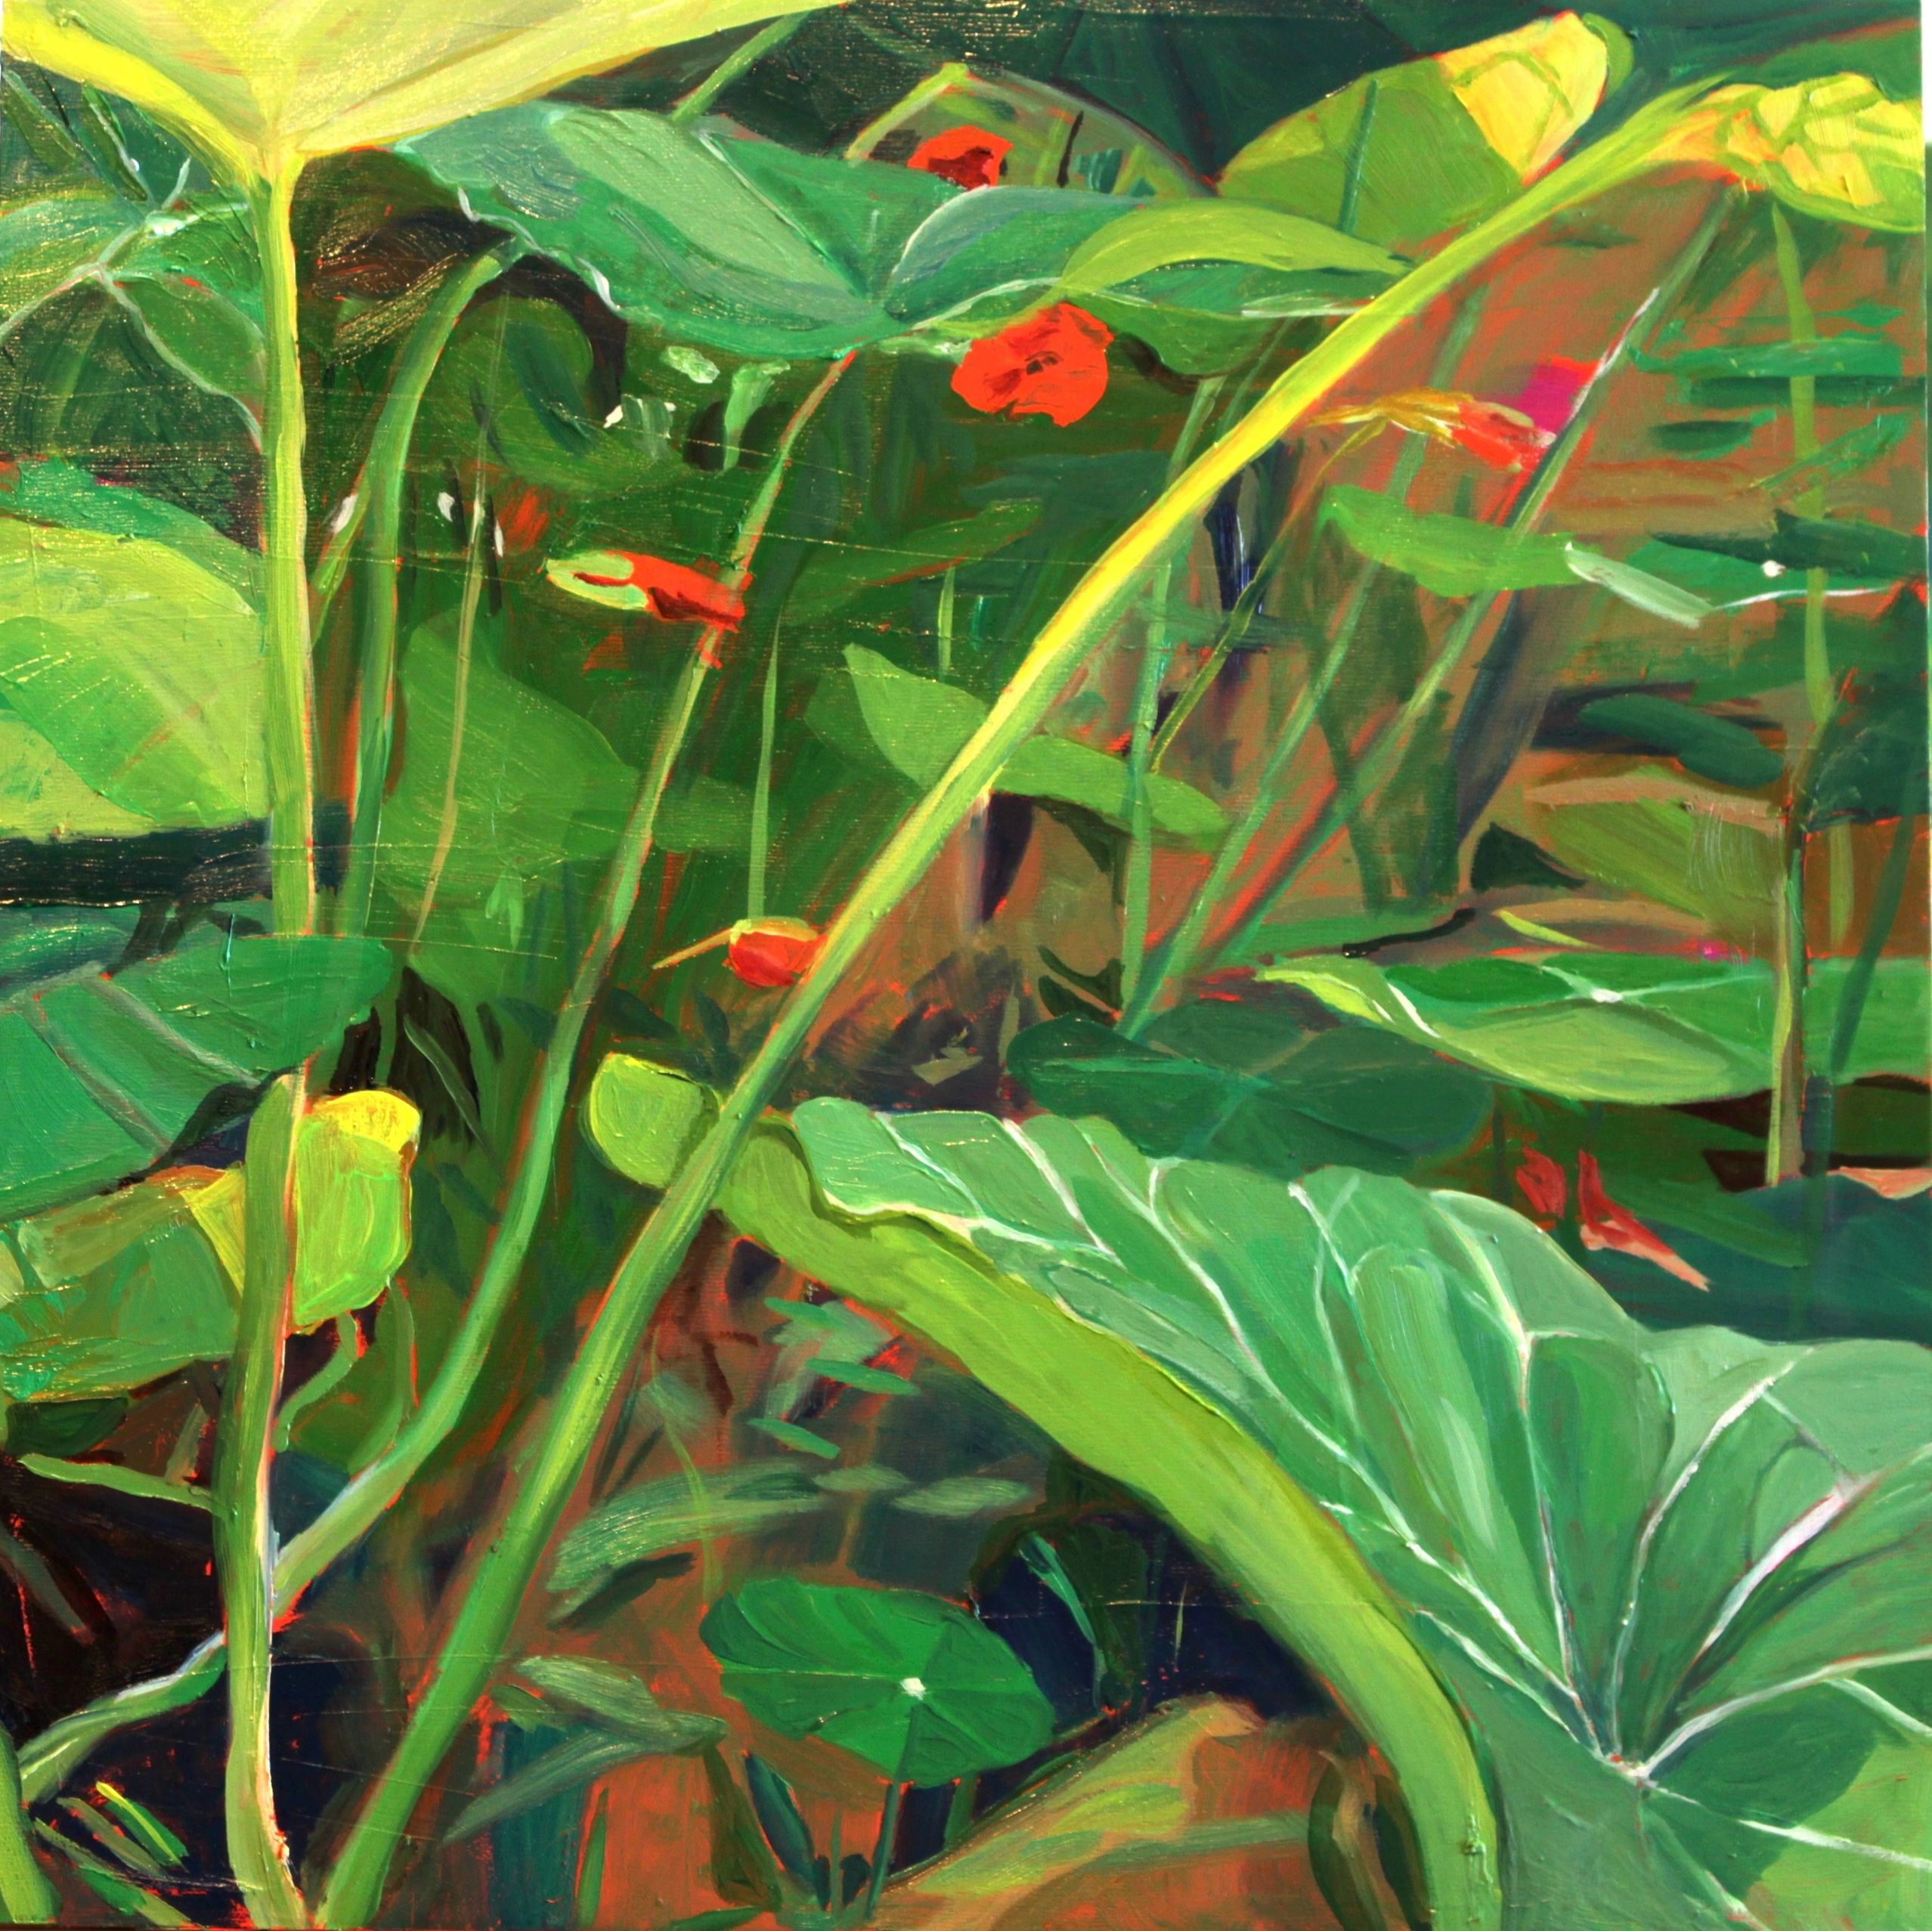 "A Touch in the Garden" 
Oil on panel 16"x16" 
Contact ArtStudio@Deborah-Brooks.com for pricing.